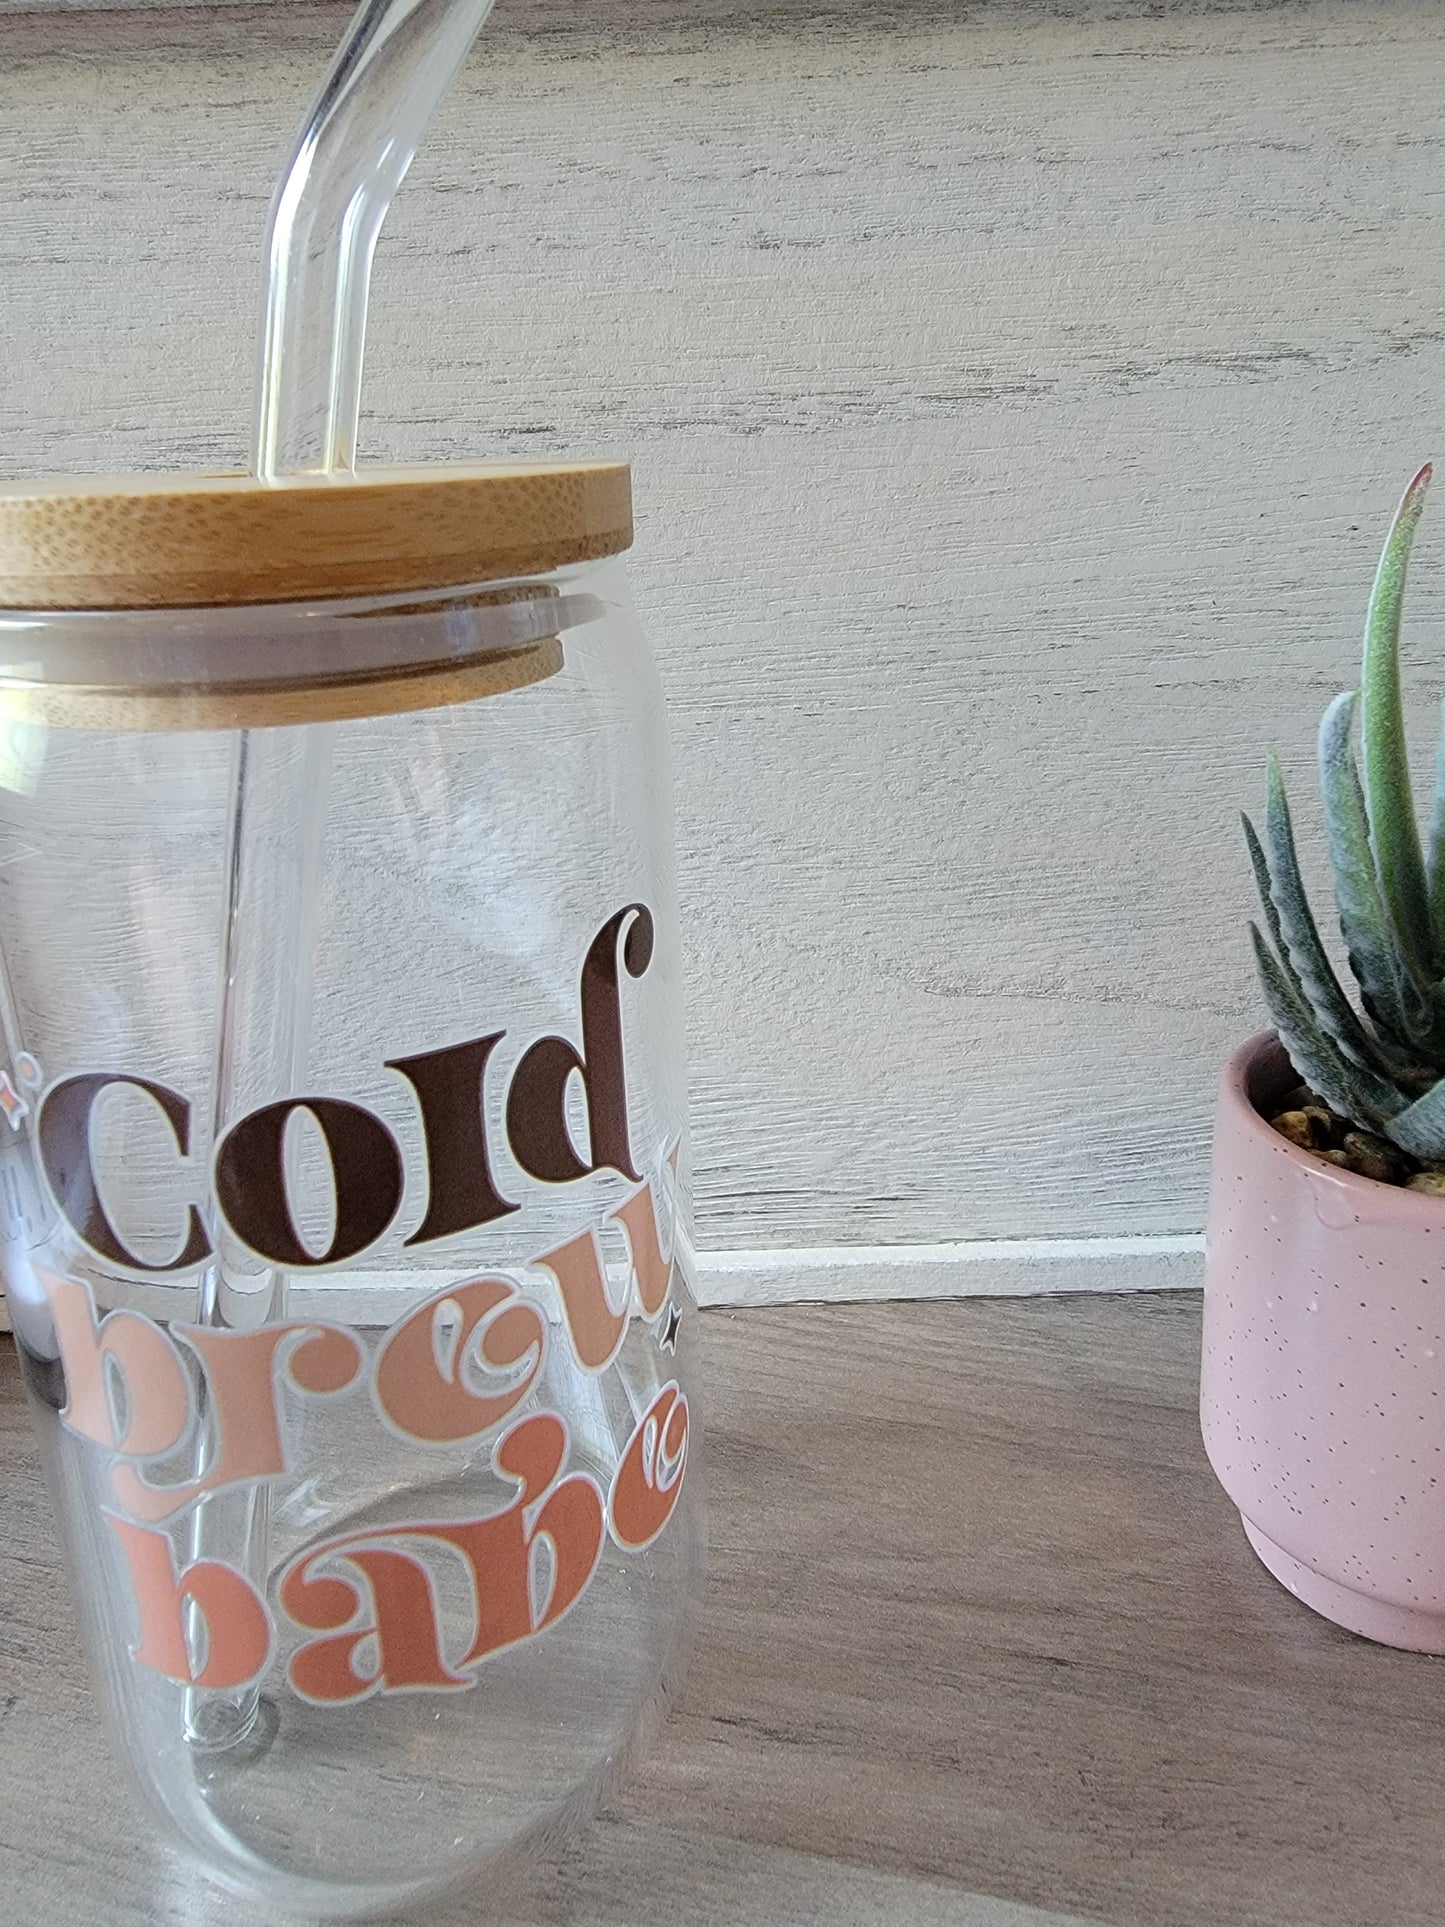 Iced Coffee Glass "Cold Brew Babe"